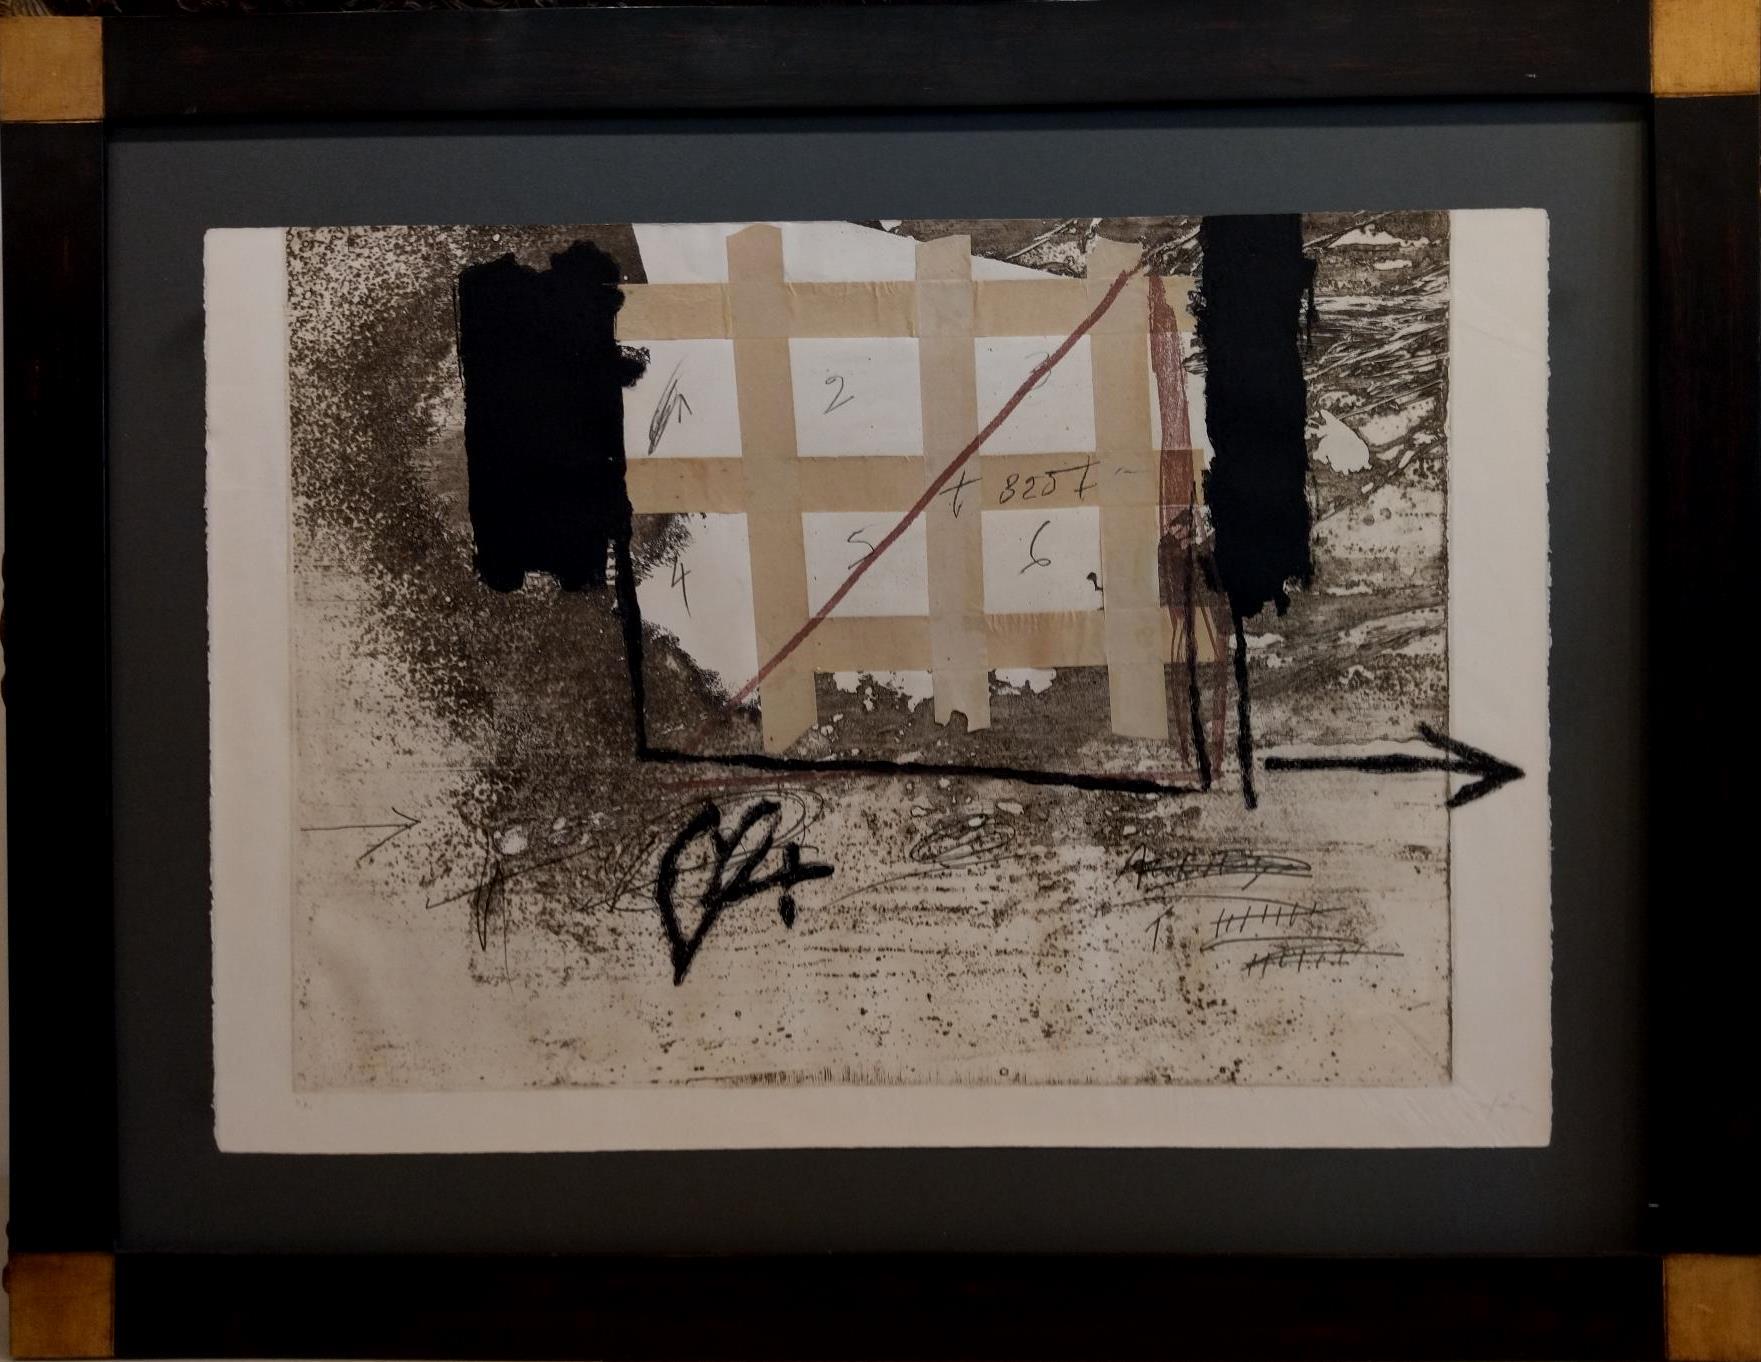  Tapies  Engraved With Plastic Collage and Polychrome stamping abstract  - Print by Antoni Tàpies